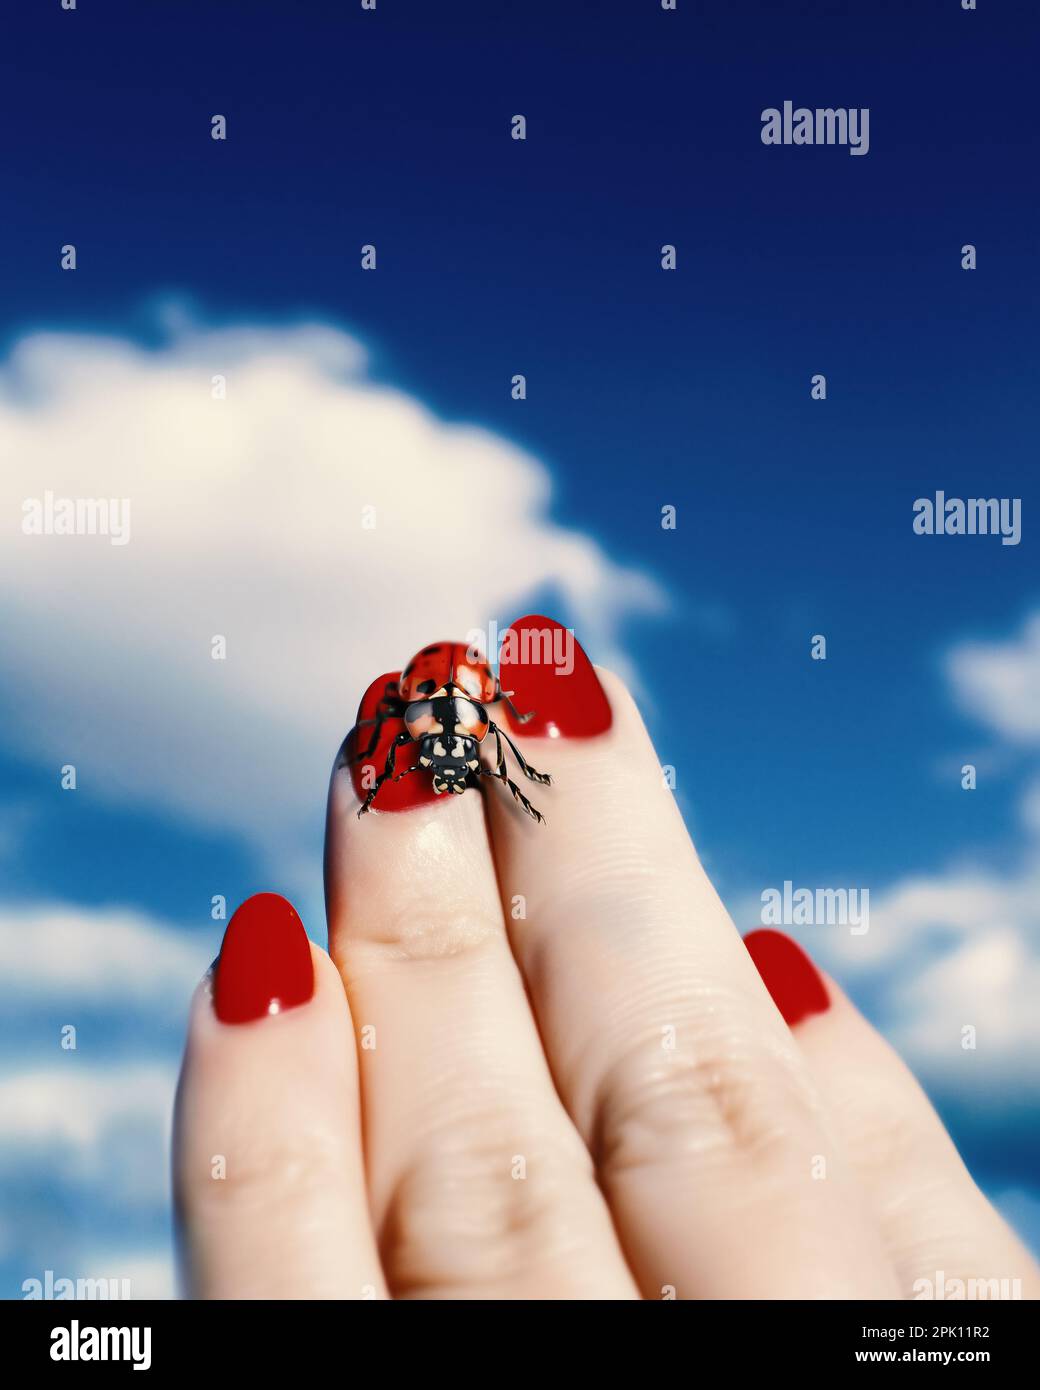 A woman's hand with red nail polish and a ladybug sitting on her fingertip. Against the background of a blue sky with clouds. Stock Photo